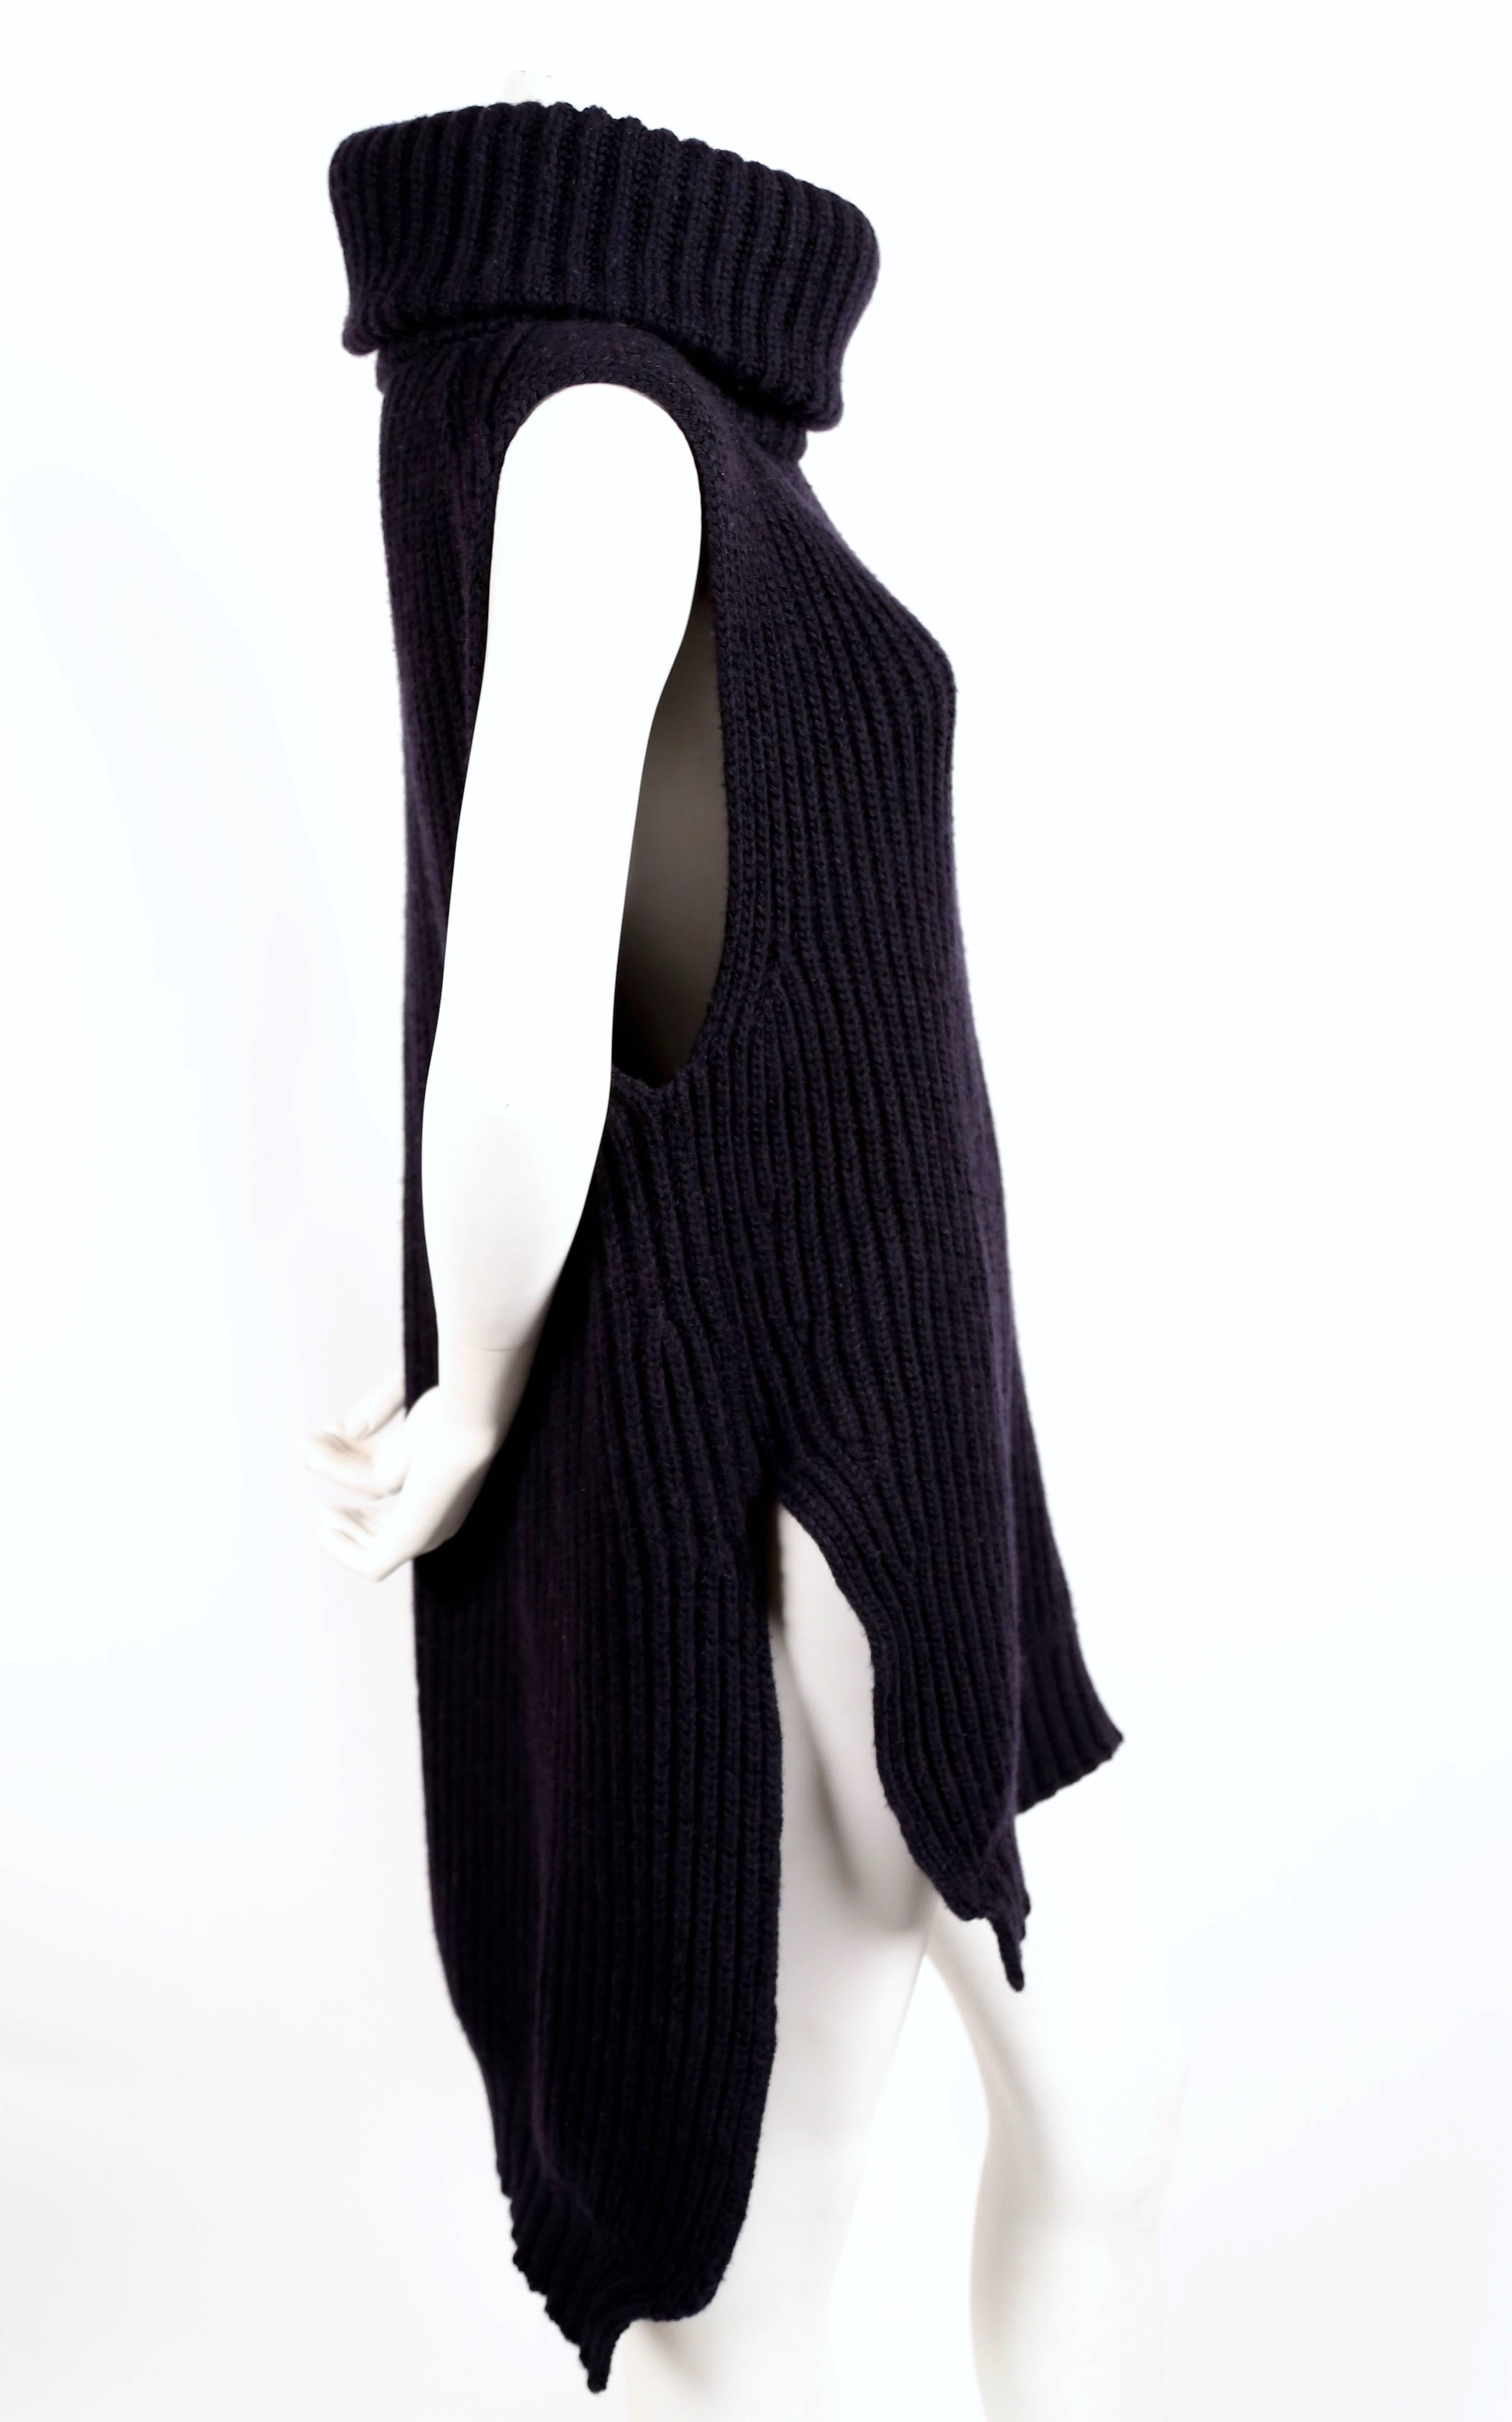 Deep navy blue tunic sweater designed by Phoebe Philo for Celine exactly as seen on the fall 2010 runway. Size 'M'. Approximate measurements: shoulder 18", bust 42", length in front 29-30" and length in back 35-36". Made in